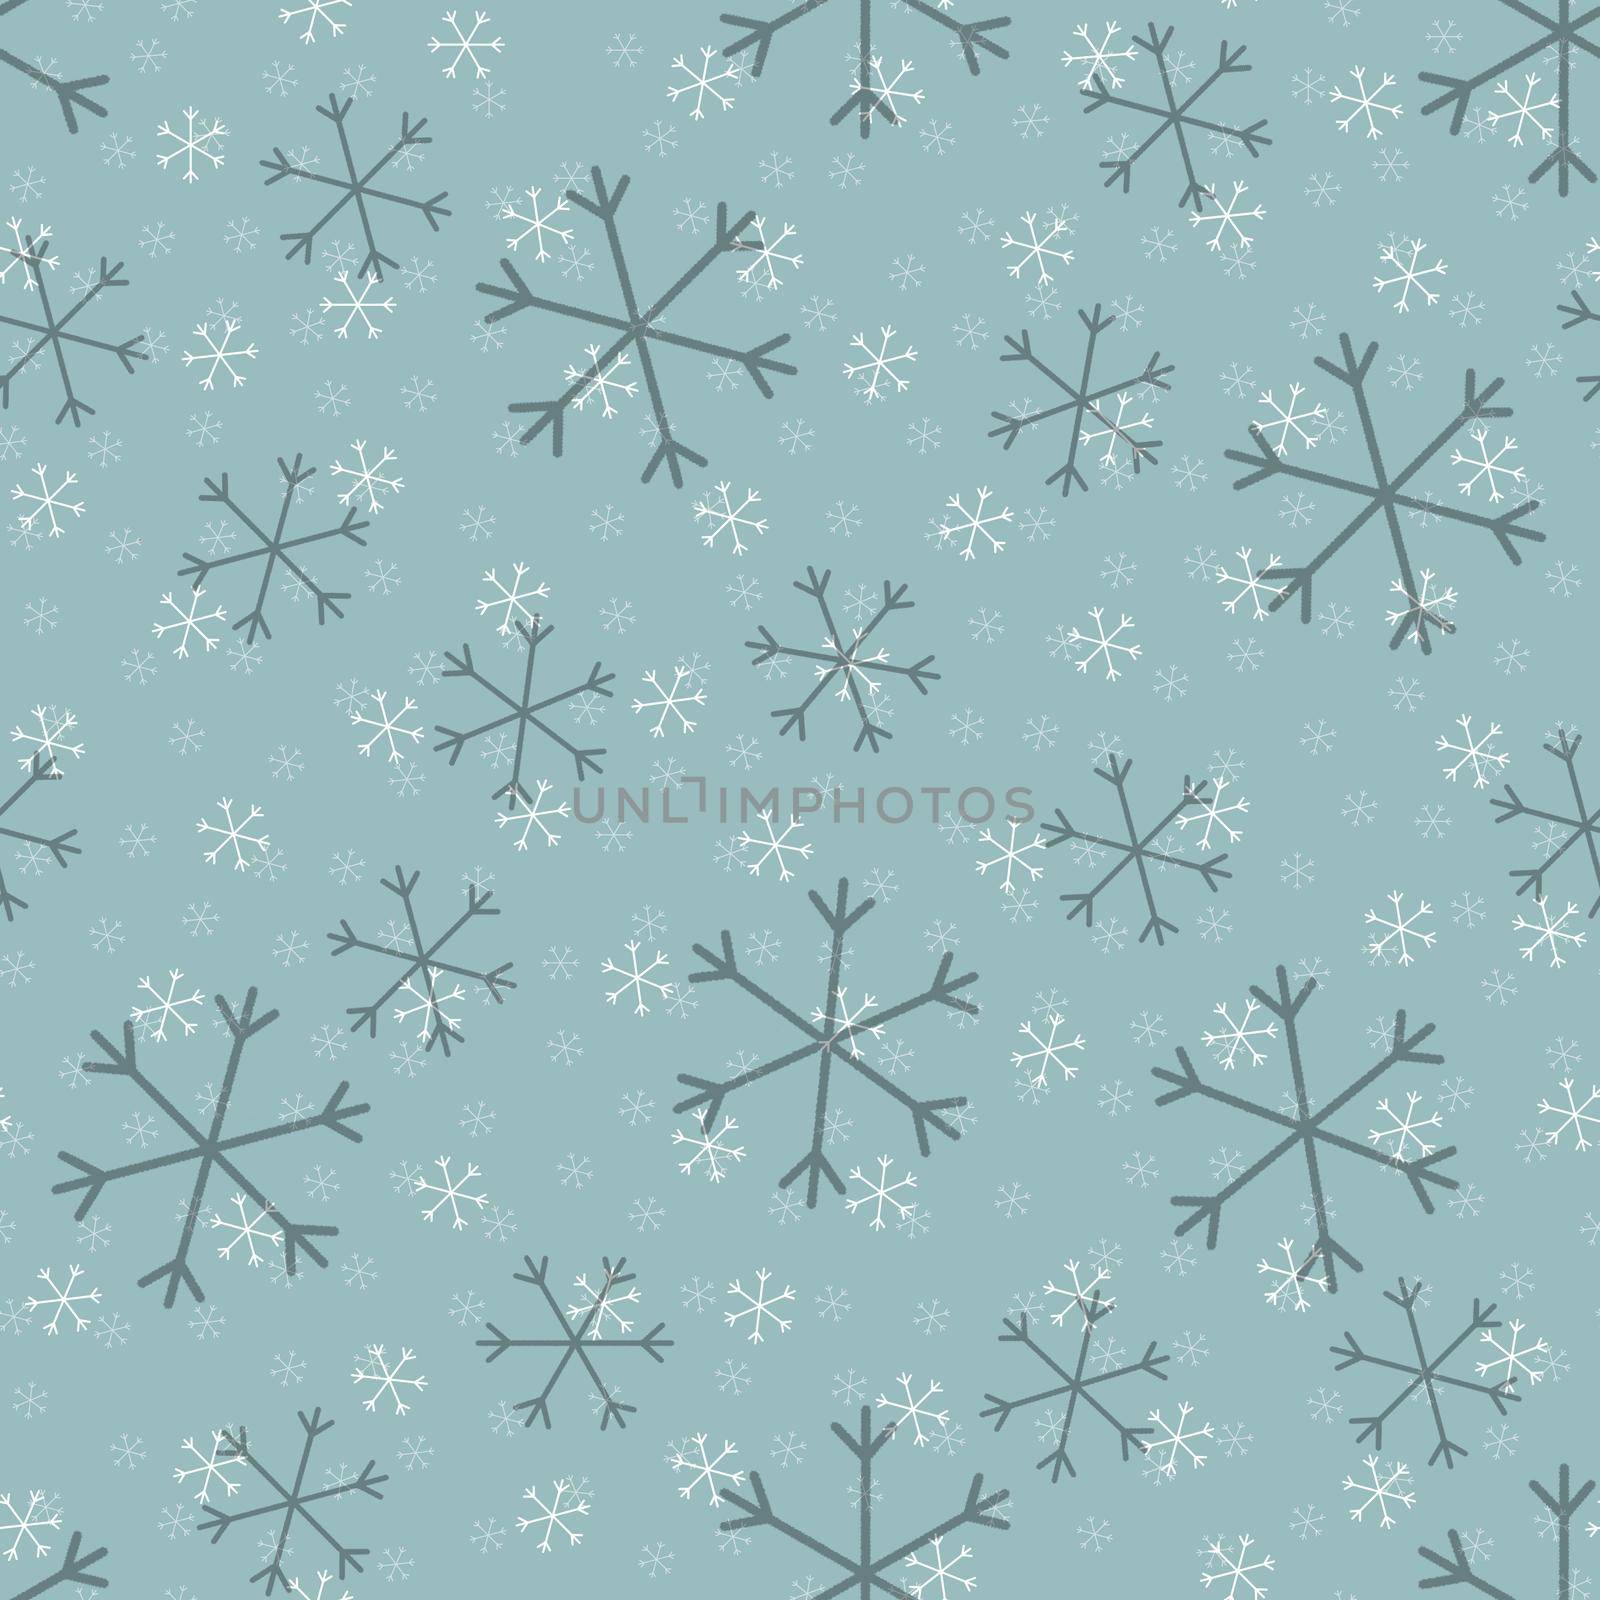 Seamless Christmas pattern doodle with hand random drawn snowflakes.Wrapping paper for presents, funny textile fabric print, design, decor, food wrap, backgrounds. new year.Raster copy.Sky gray, lilac